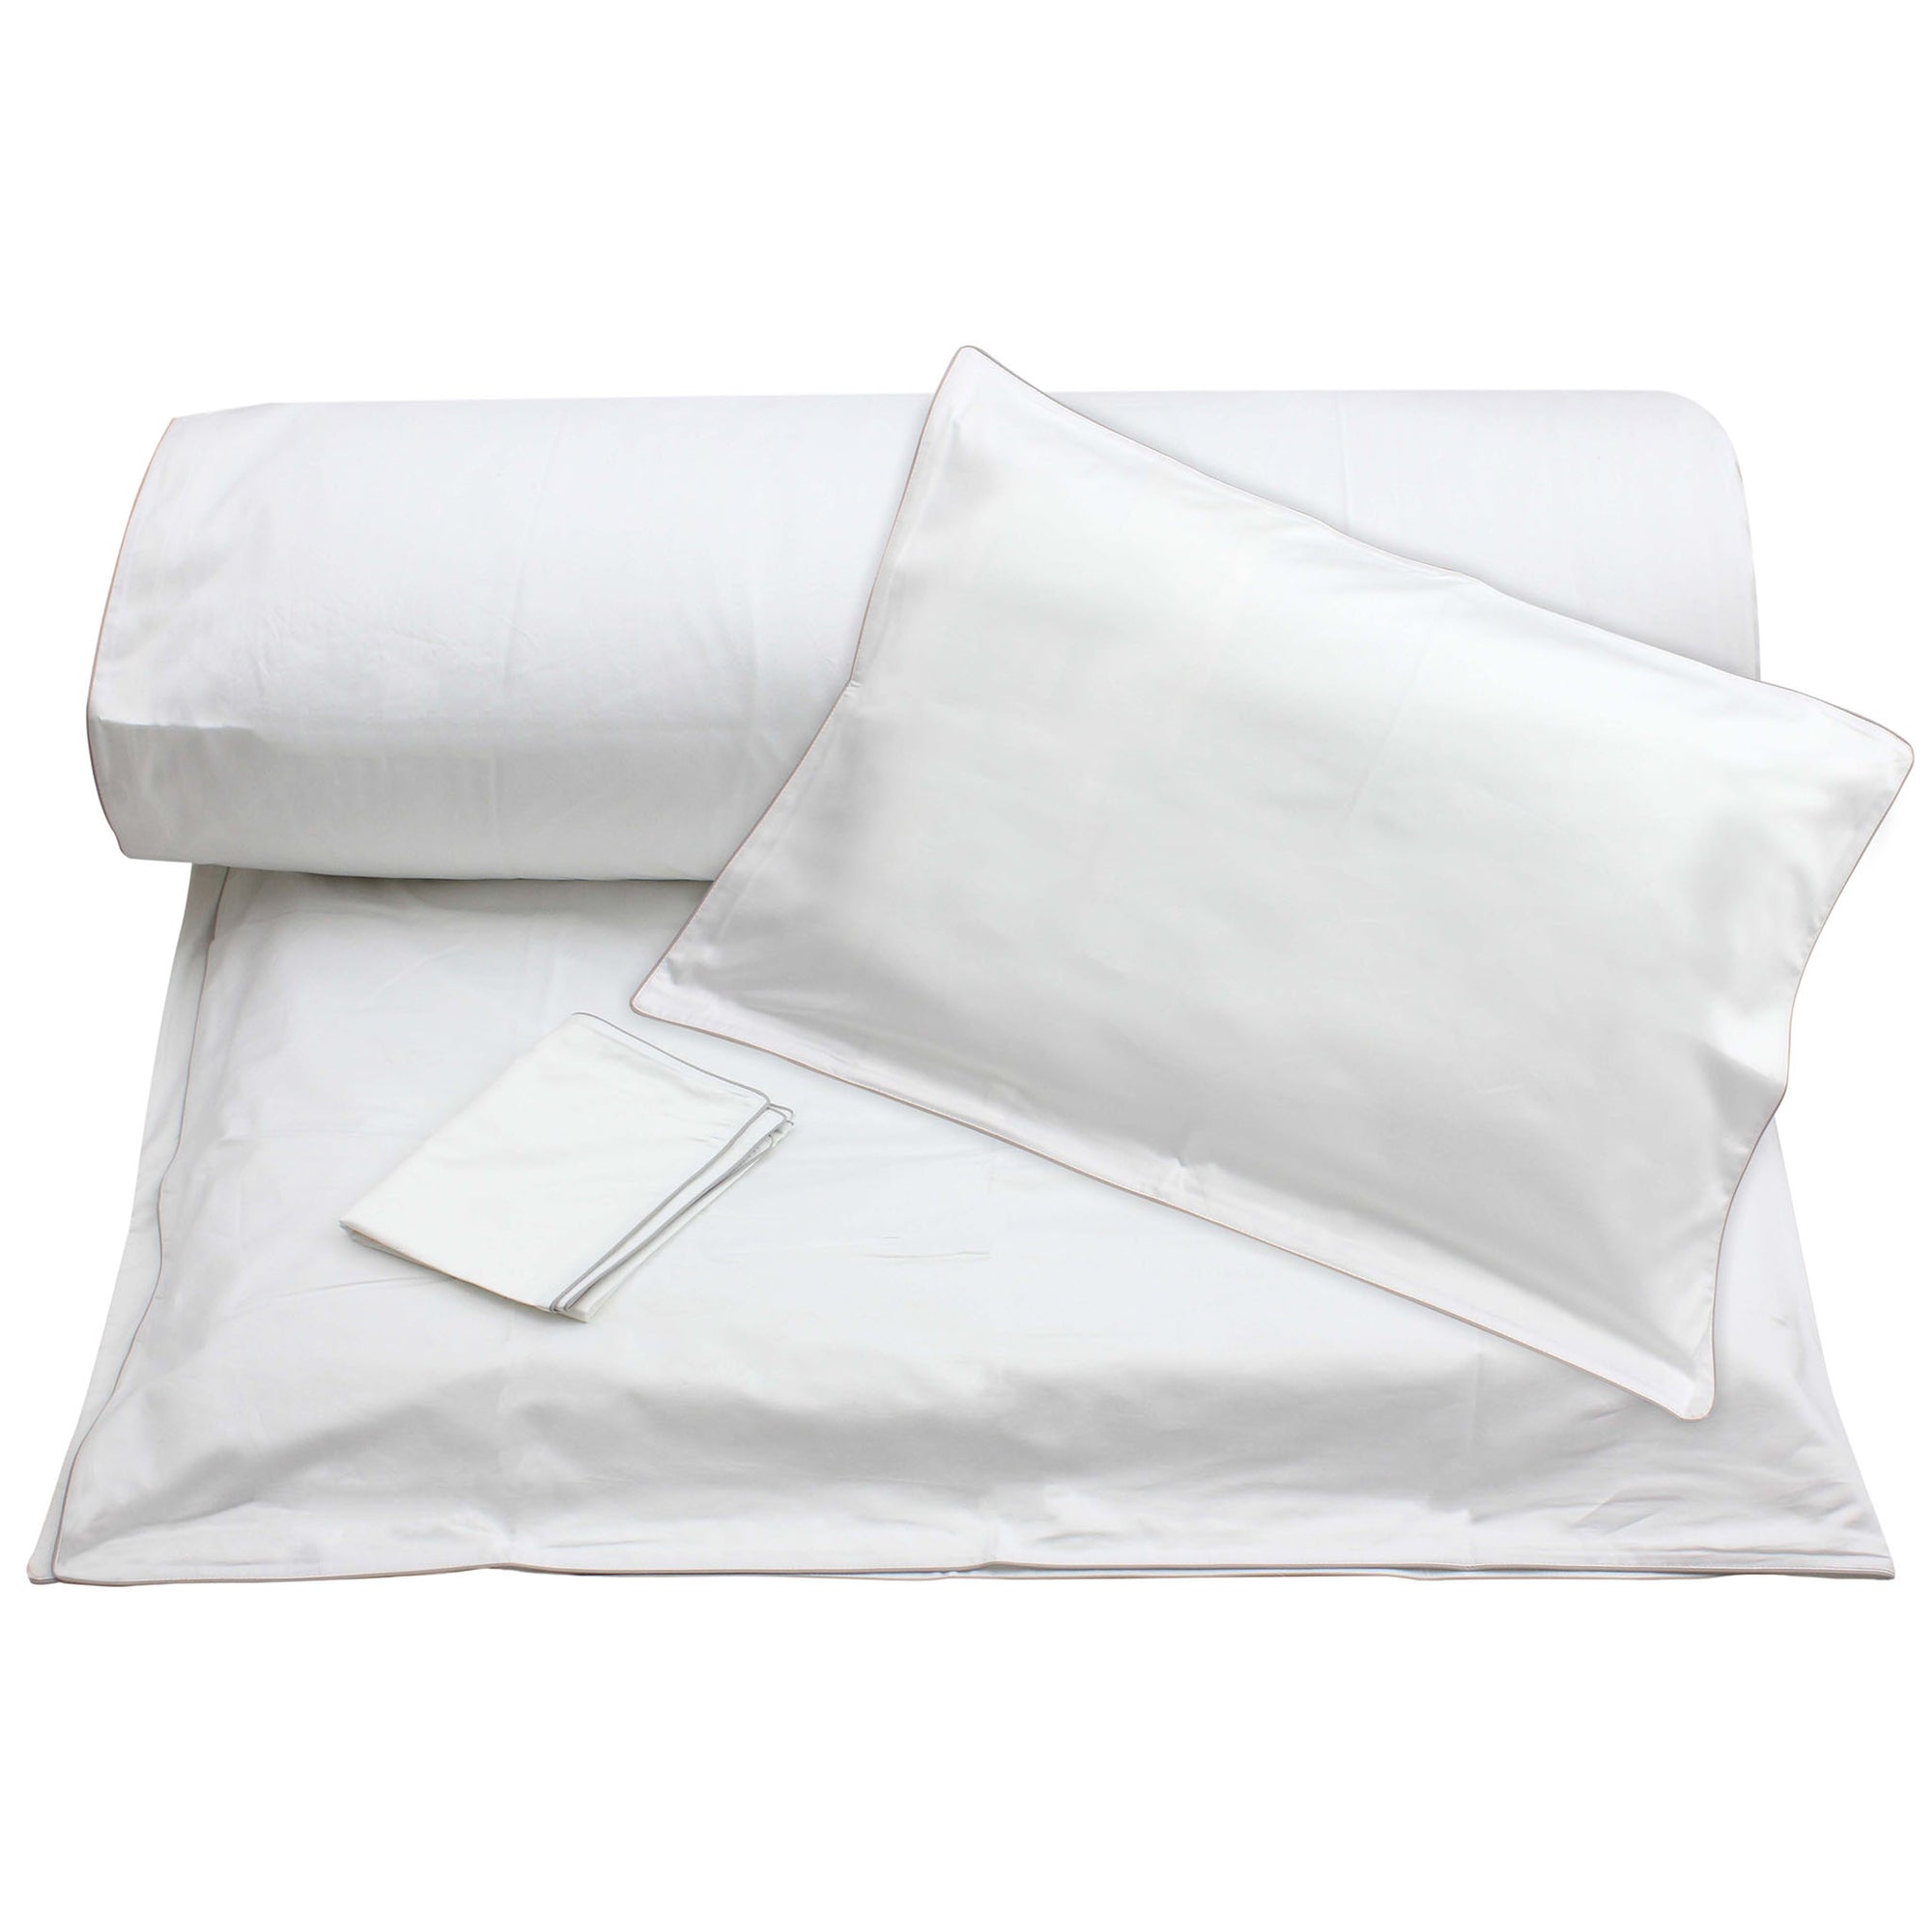 White Duvet with Grey Piping + Pillowcases (600 TC)